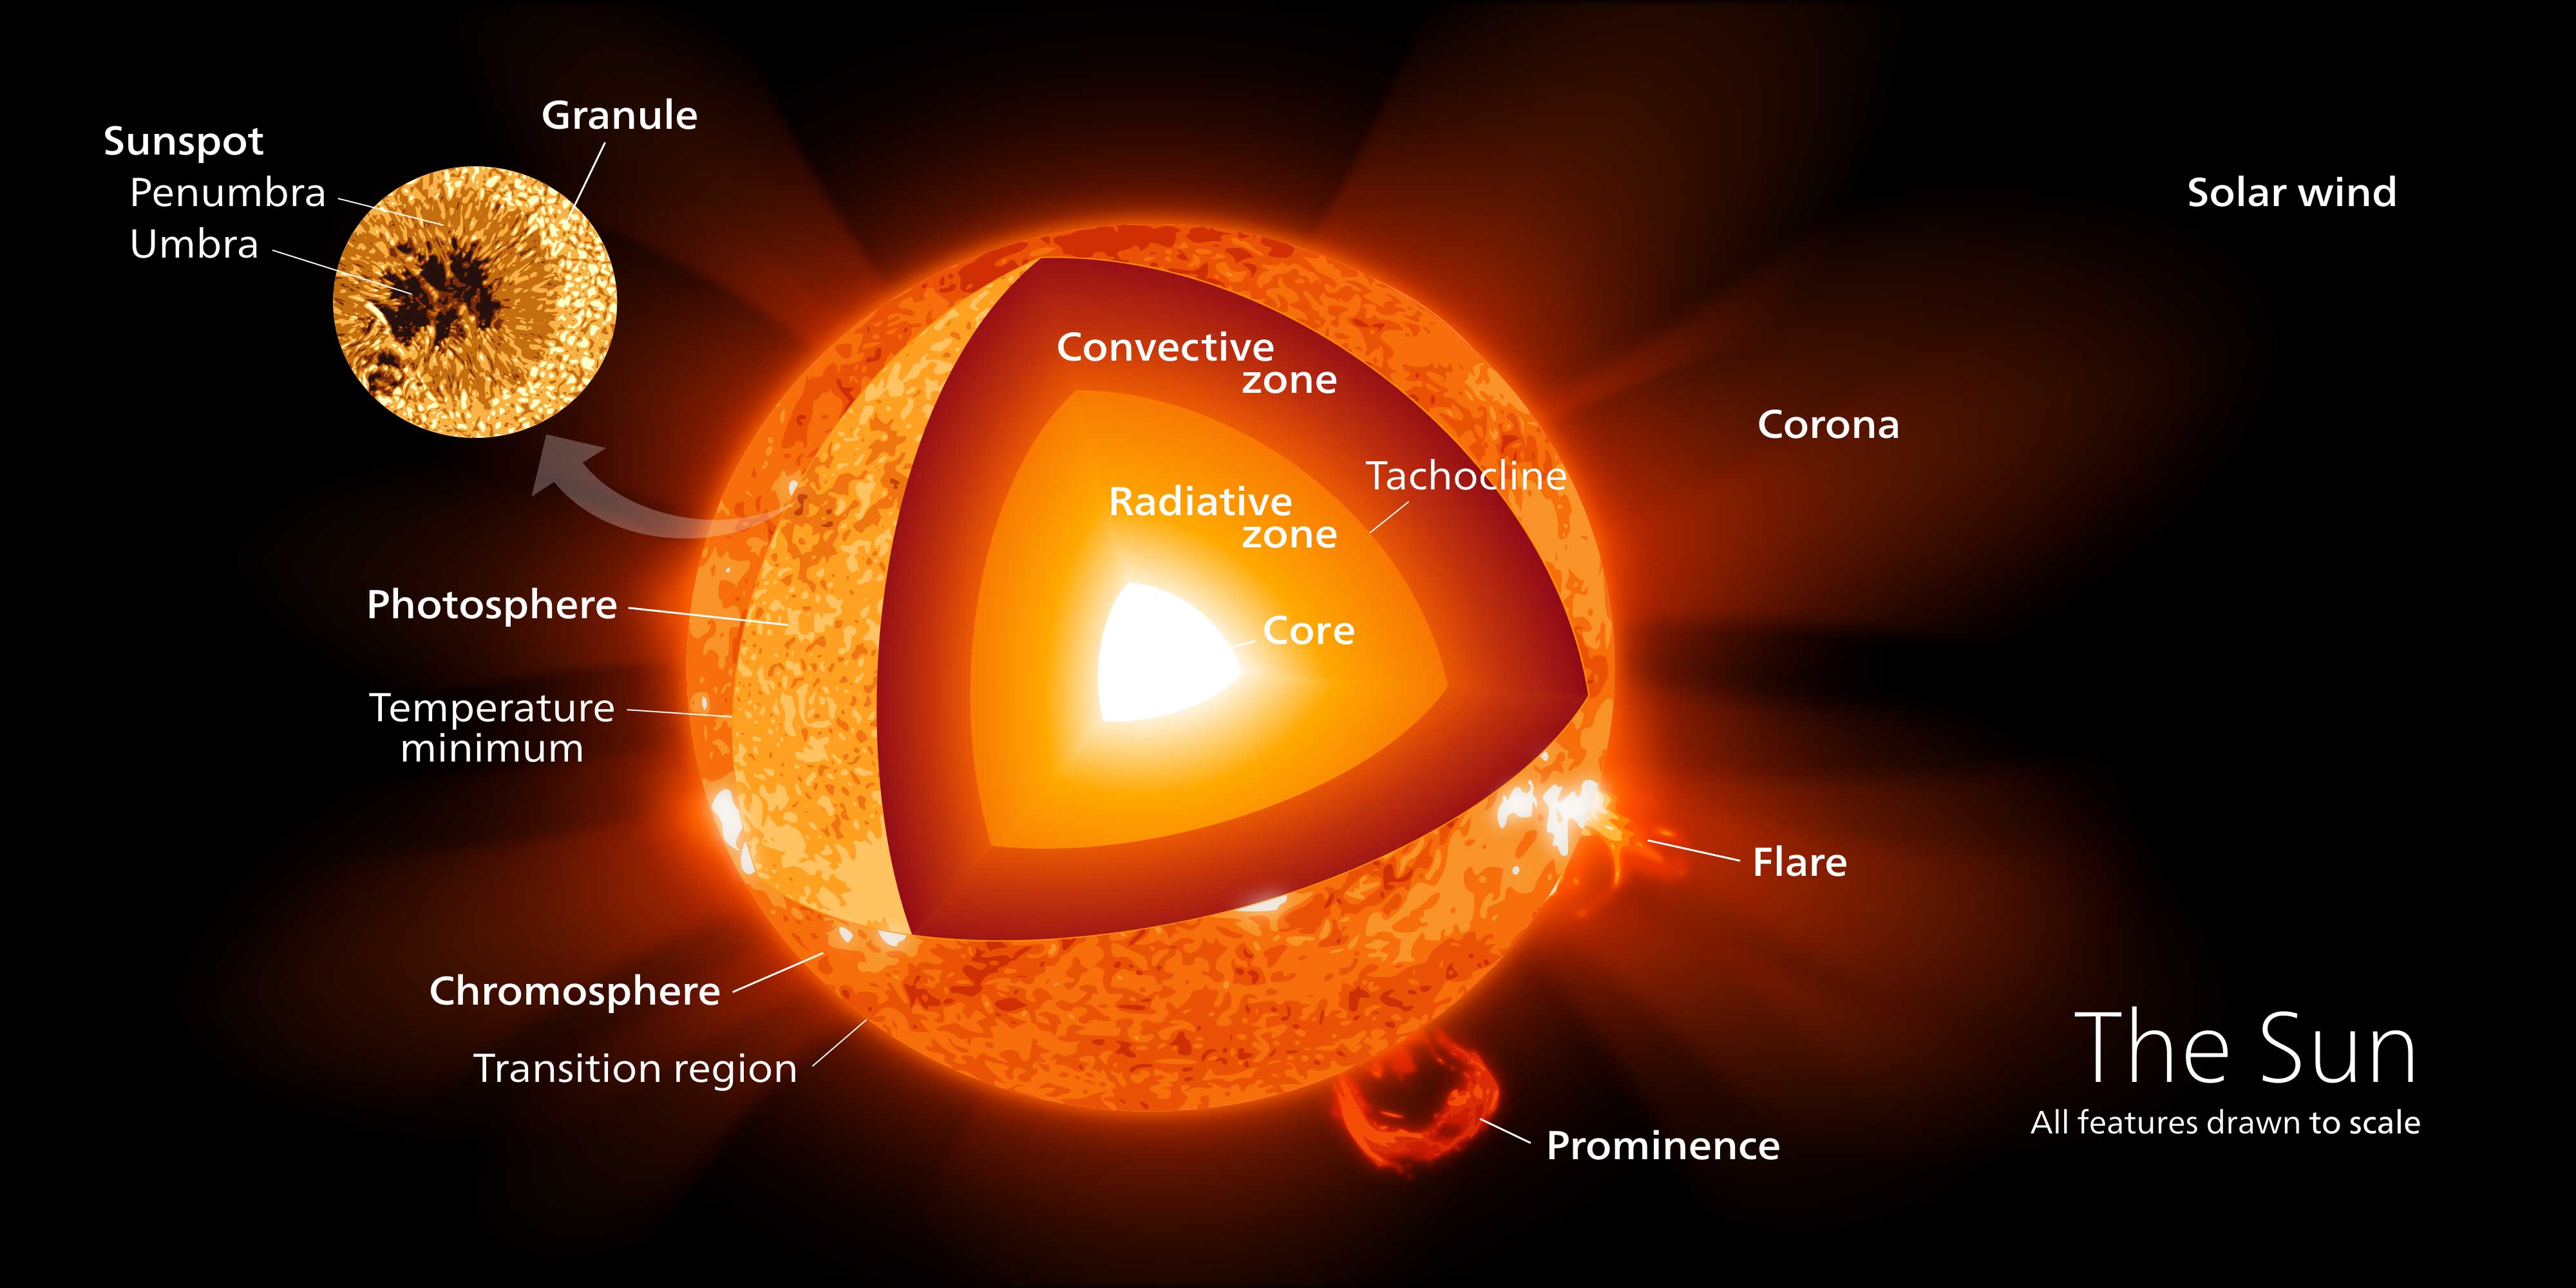 Diagram showing the four major regions of the sun, the connective zone, radiative zone, interface zone, and core.